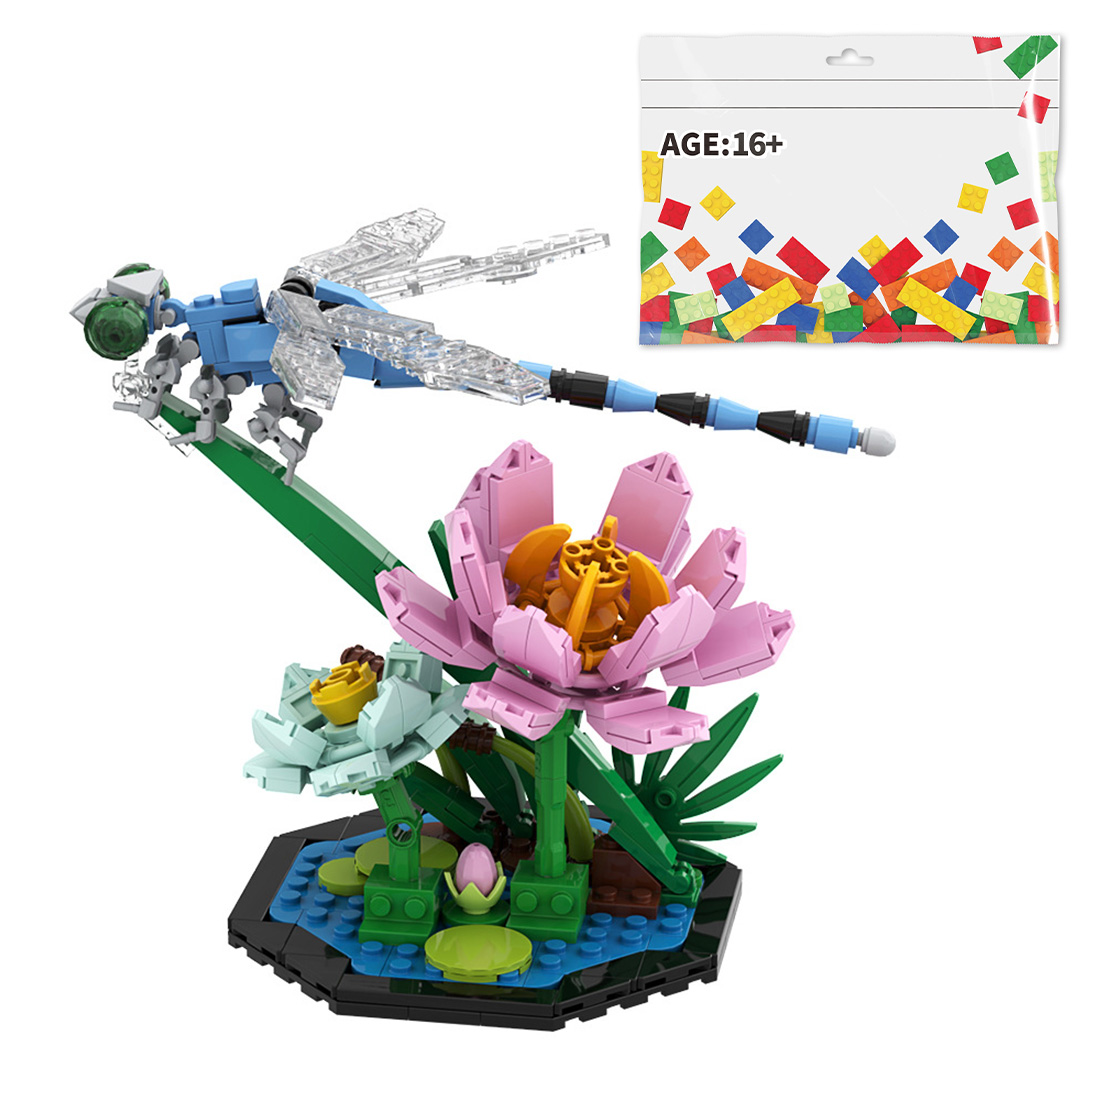 Insect Series - Dragonfly Assembly Model Building Blocks Set Creative Ornament